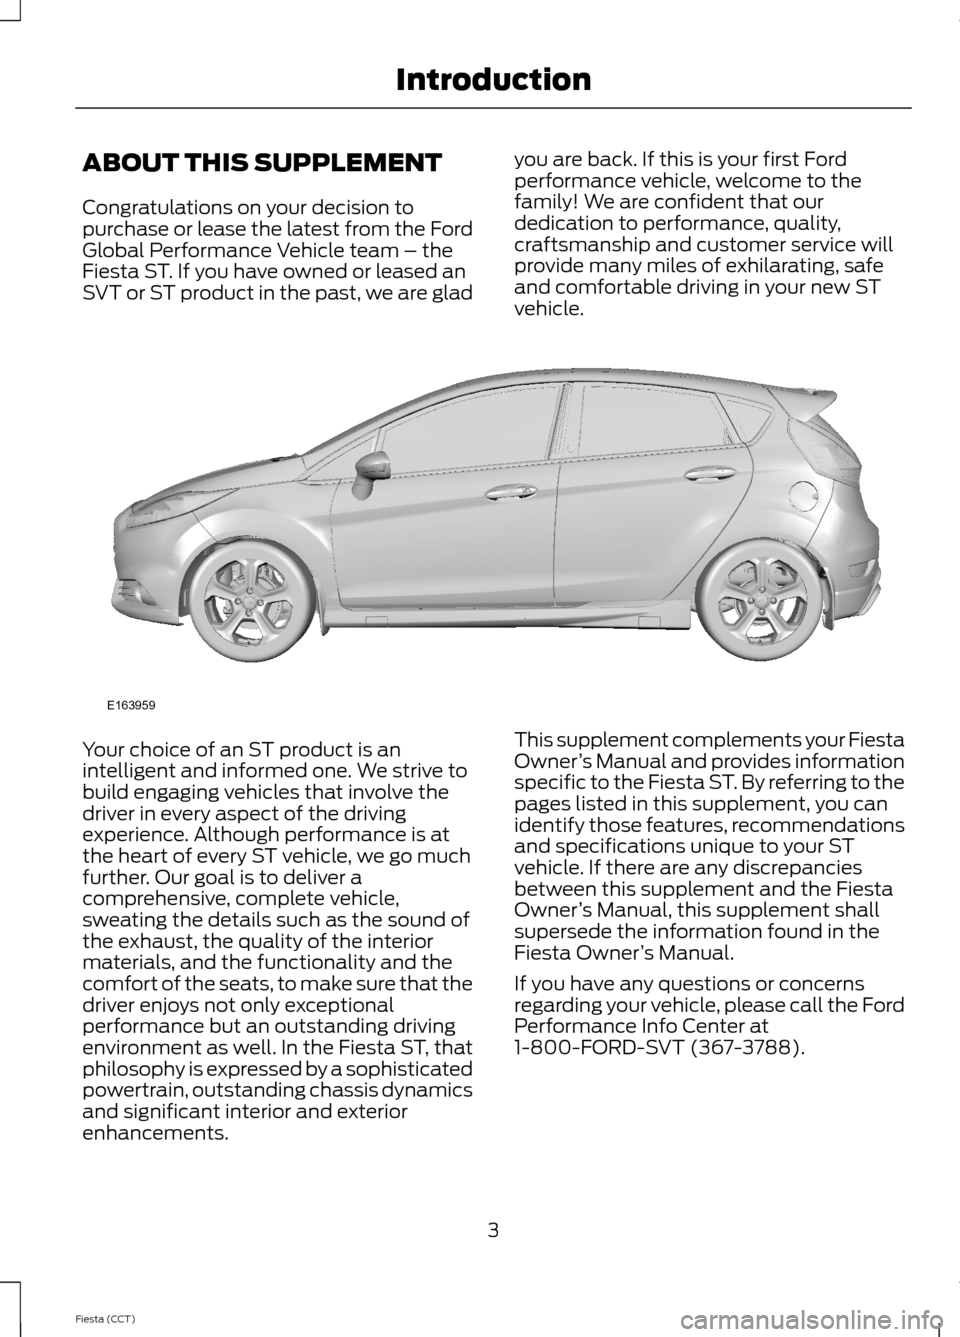 FORD FIESTA 2014 6.G ST Supplement Manual ABOUT THIS SUPPLEMENT
Congratulations on your decision topurchase or lease the latest from the FordGlobal Performance Vehicle team – theFiesta ST. If you have owned or leased anSVT or ST product in 